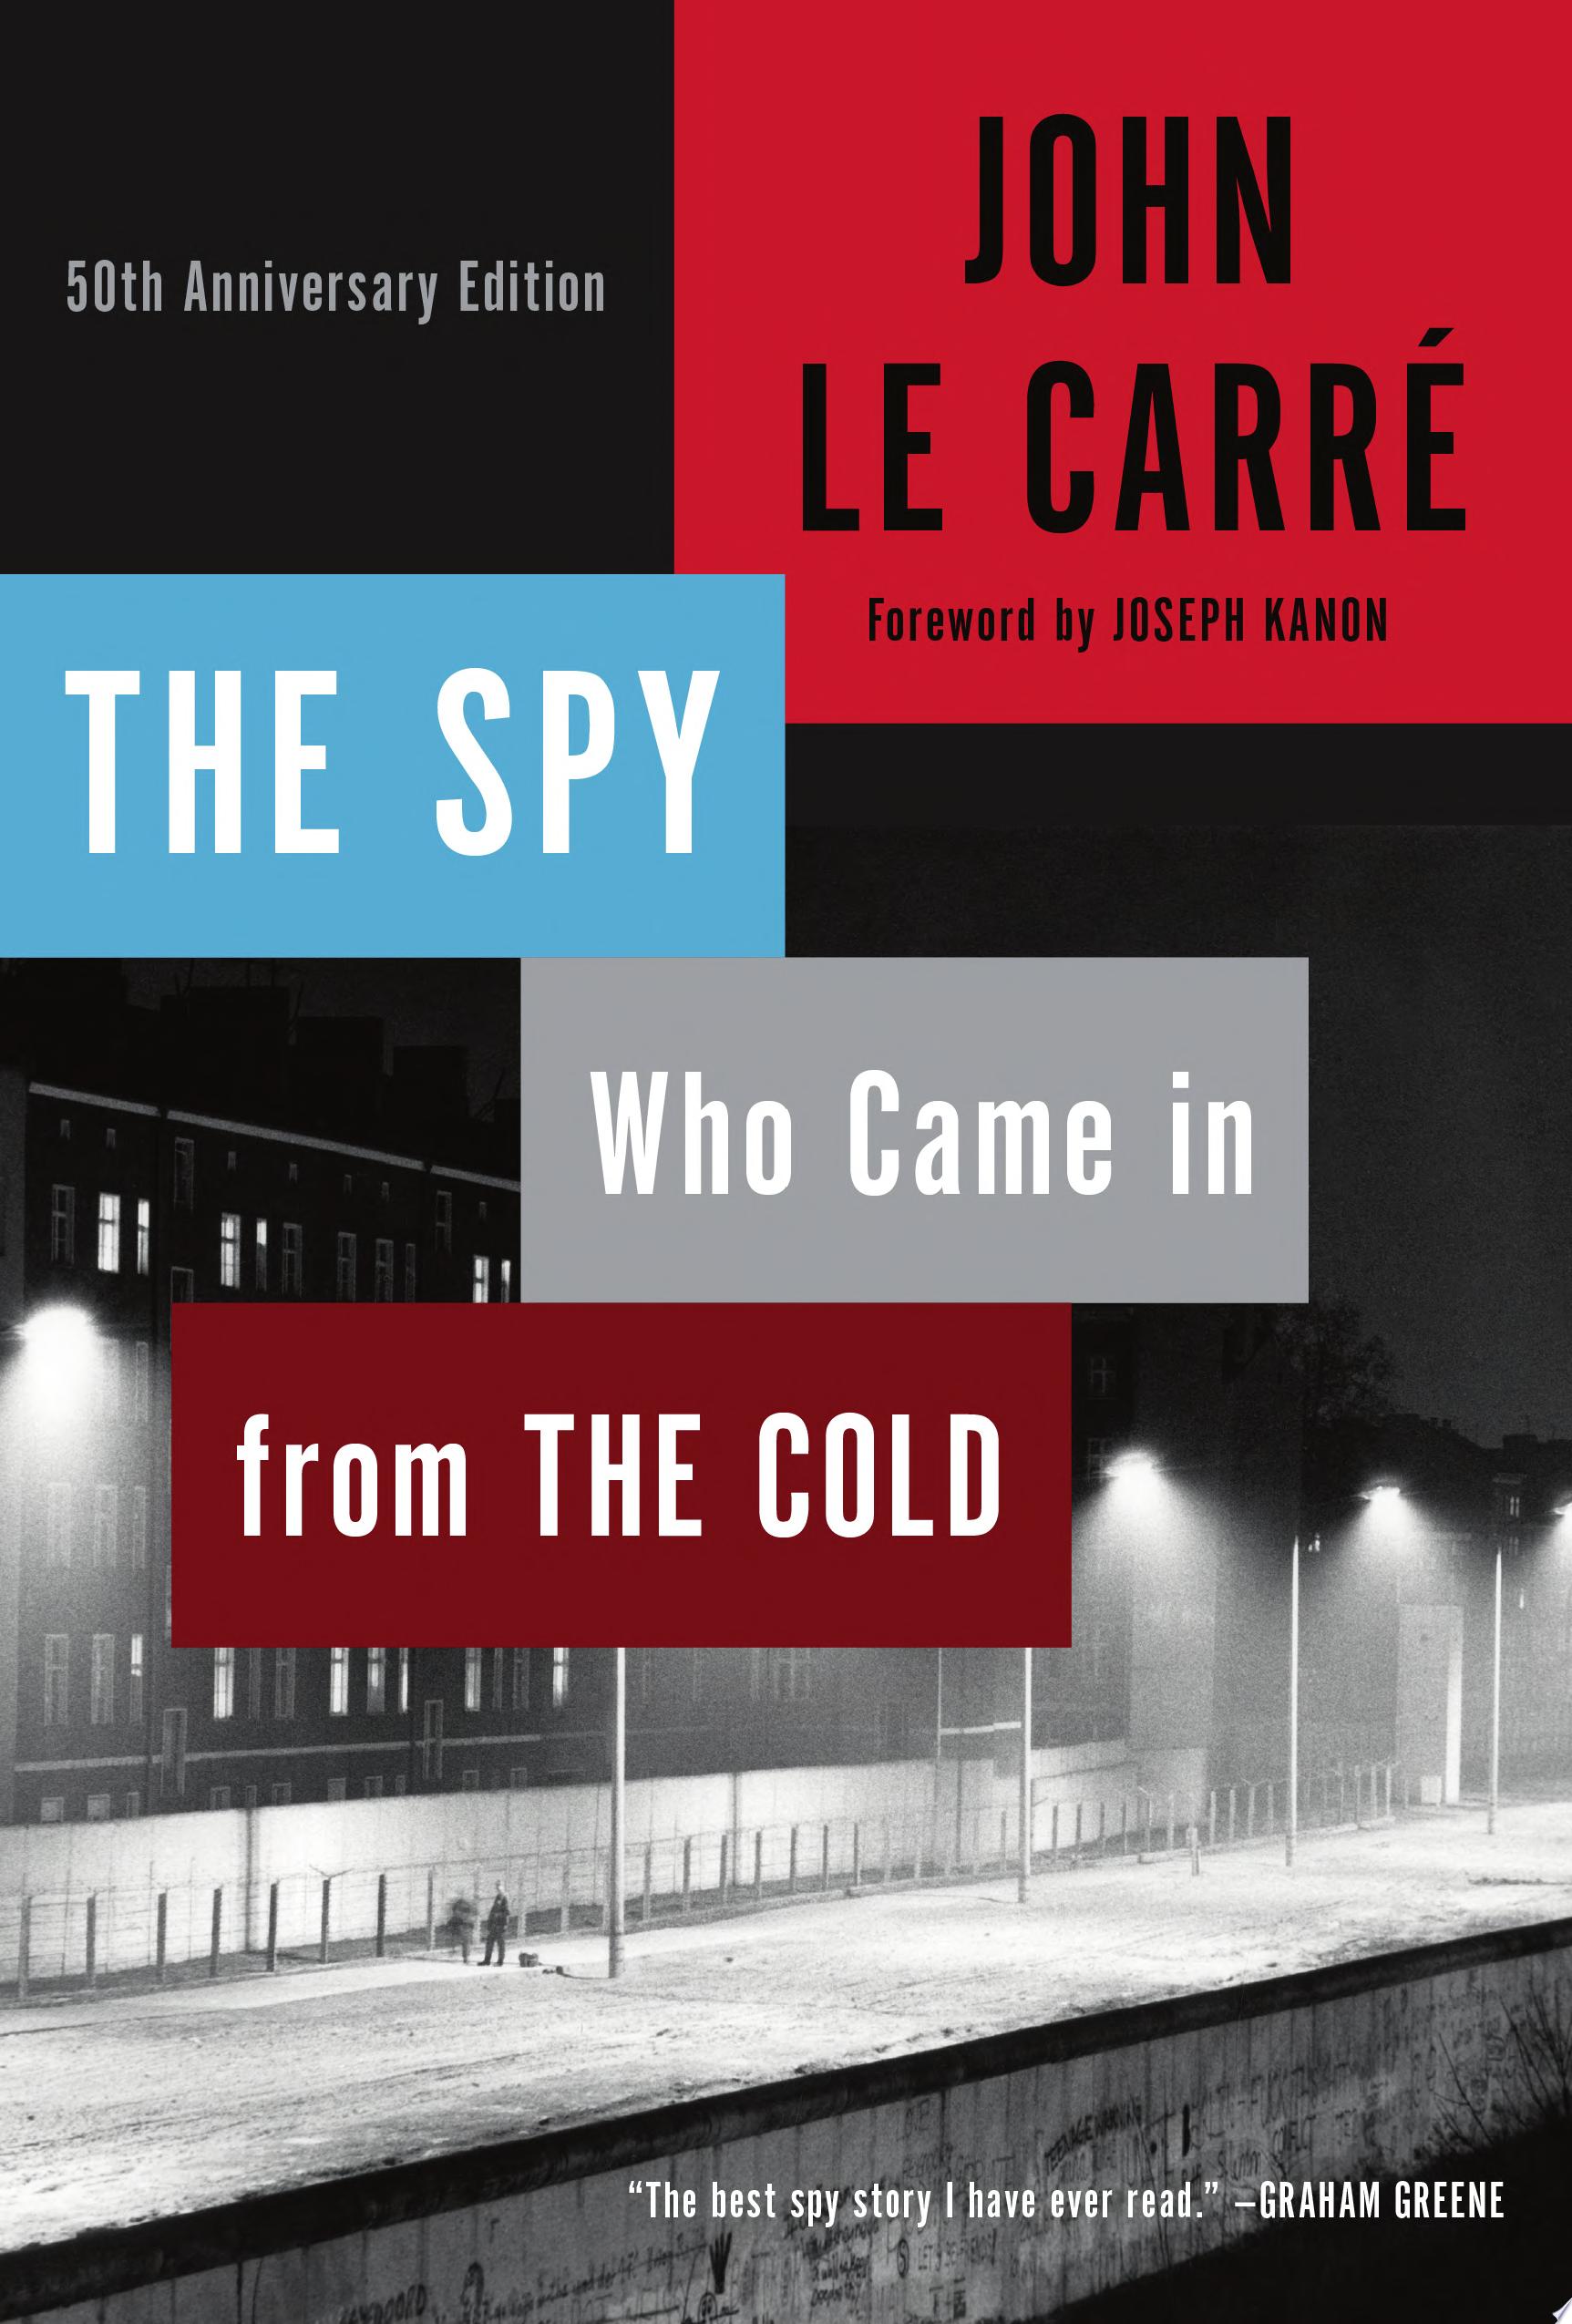 Image for "The Spy Who Came in From the Cold"